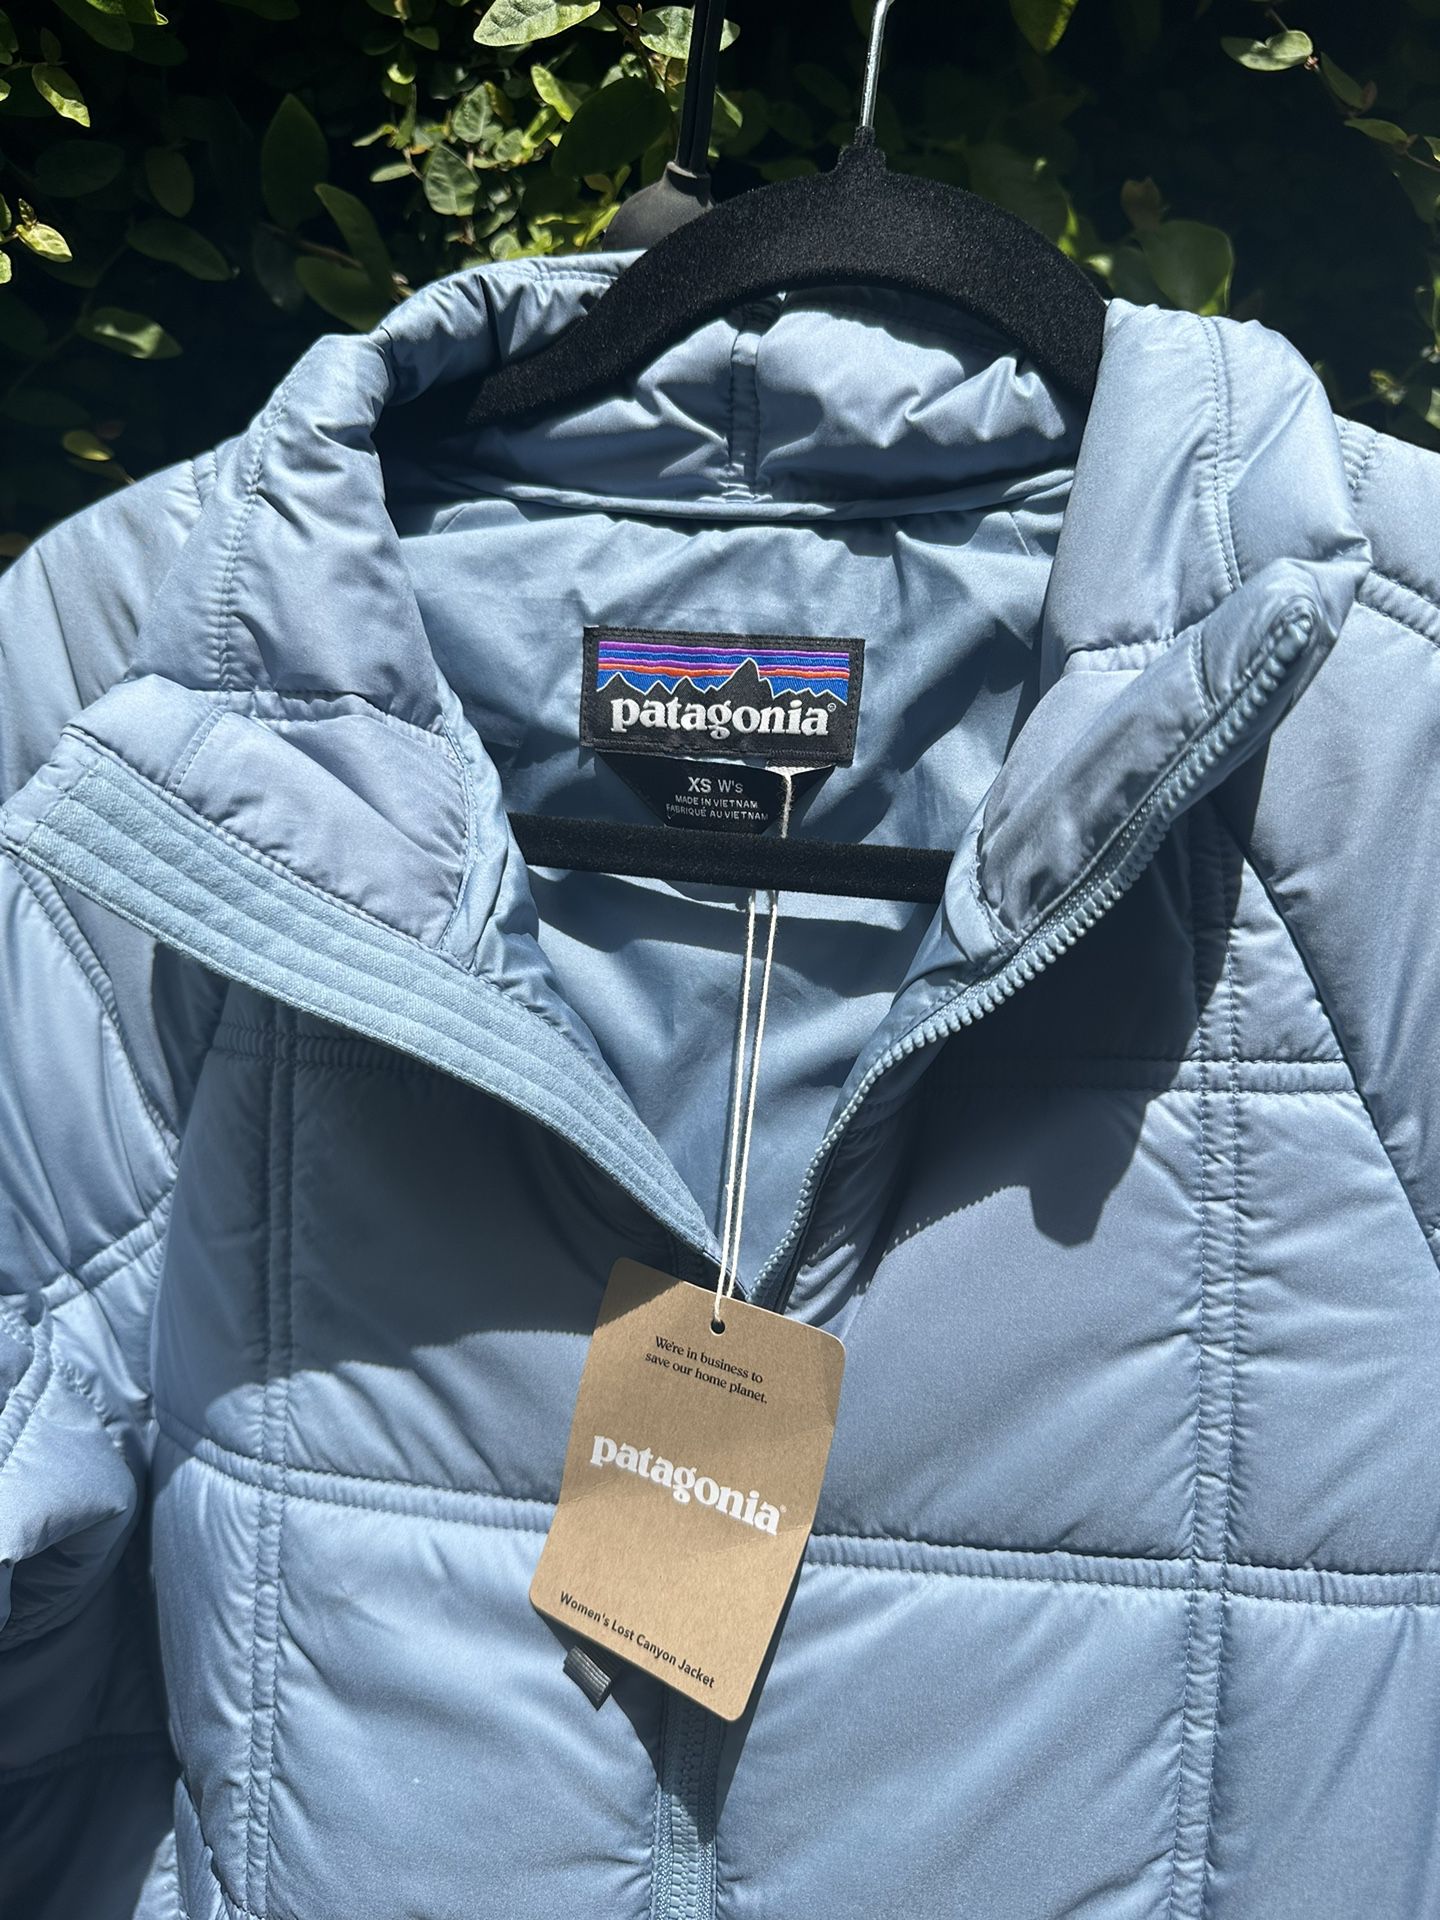 New: Patagonia Women’s Lost Canyon Jacket XS 